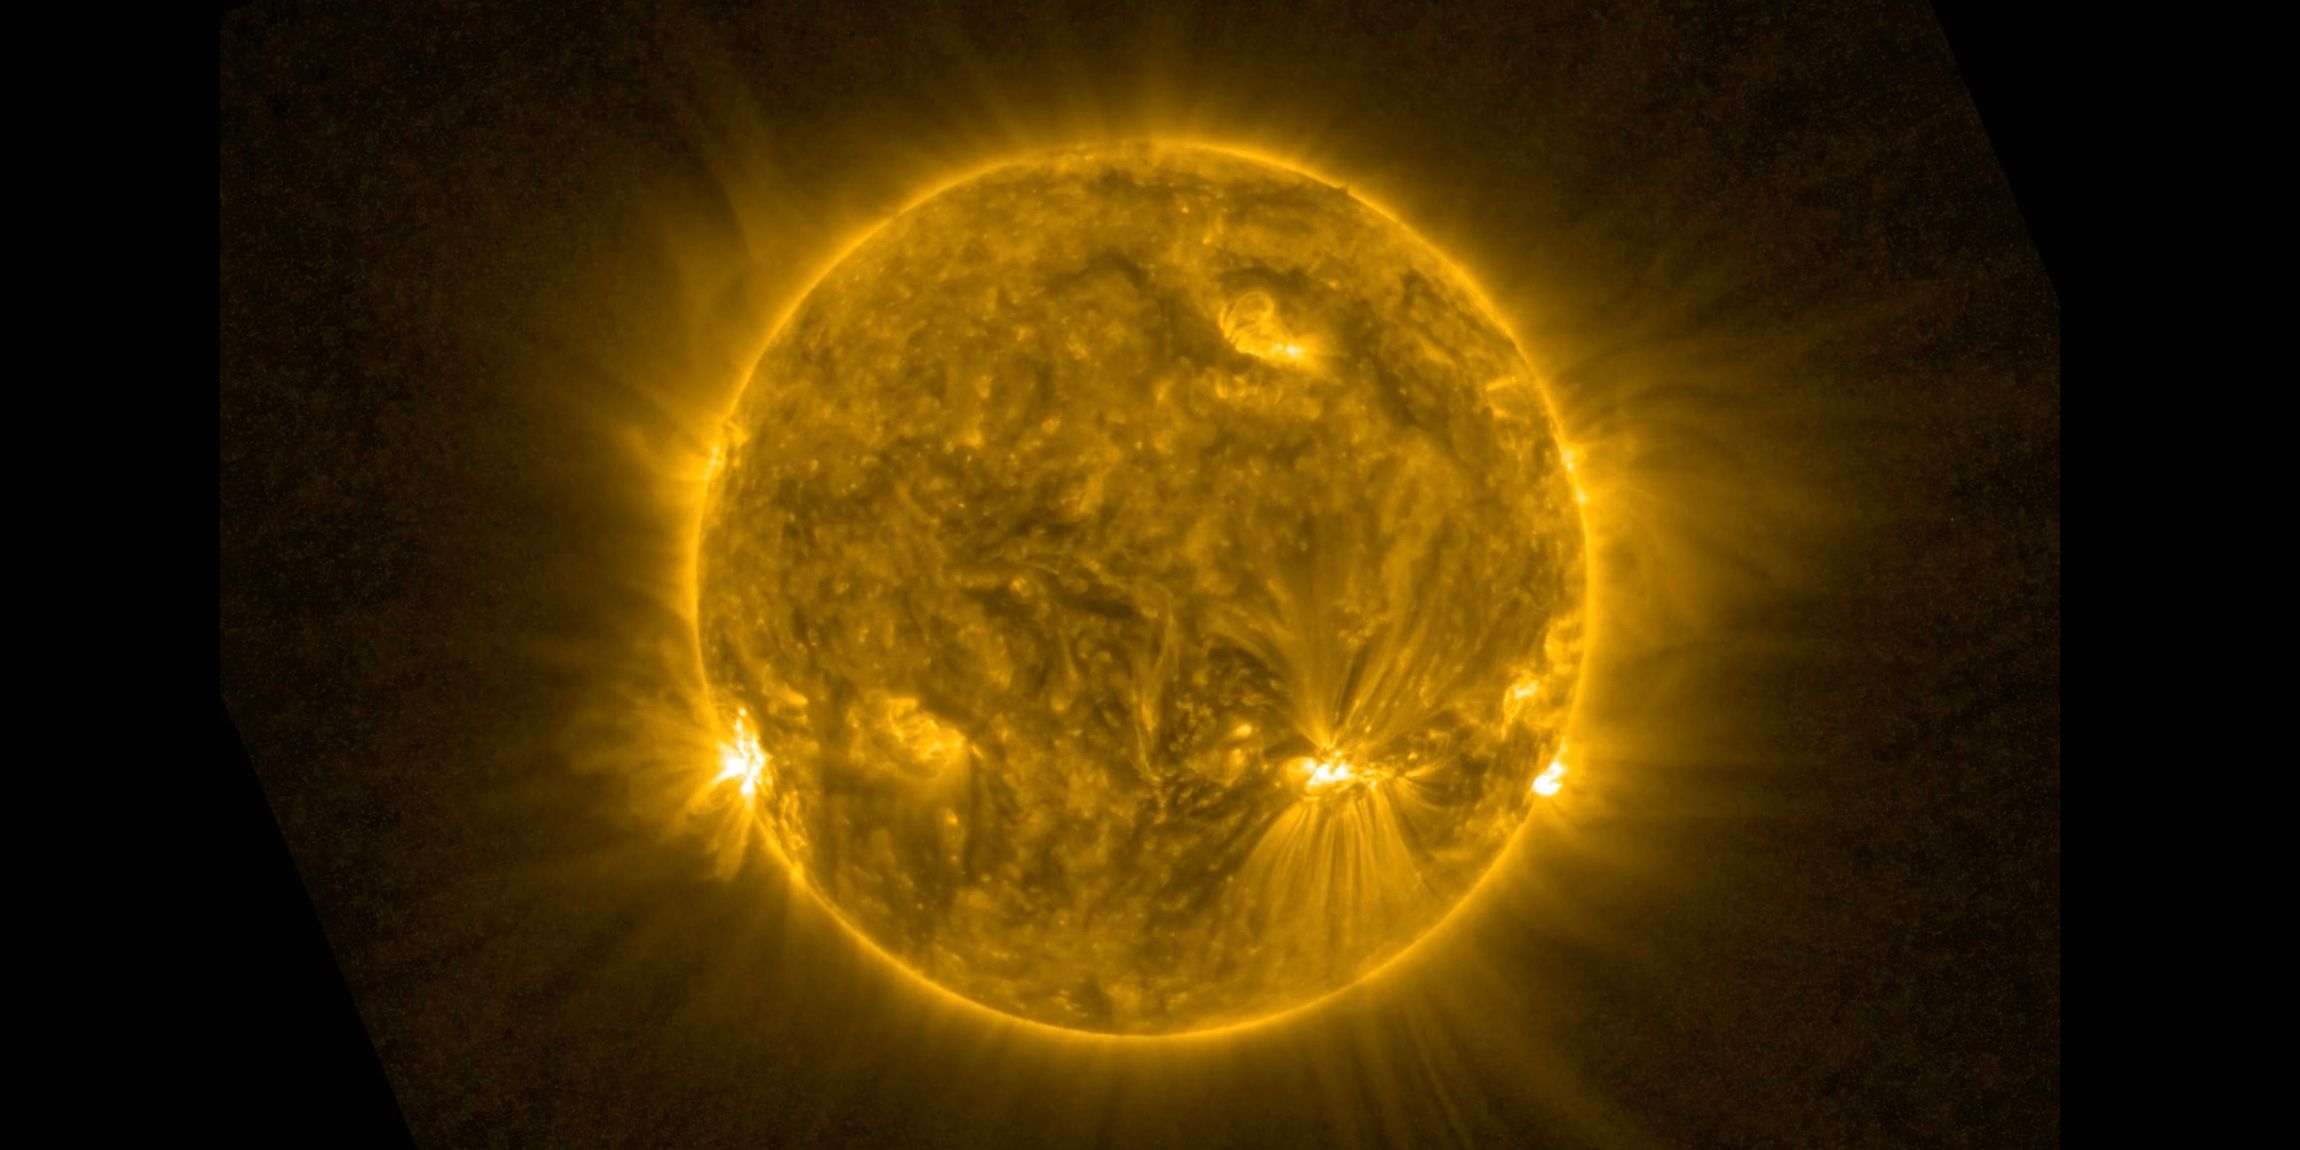 An image of the sun captured by ESA's Solar Orbiter